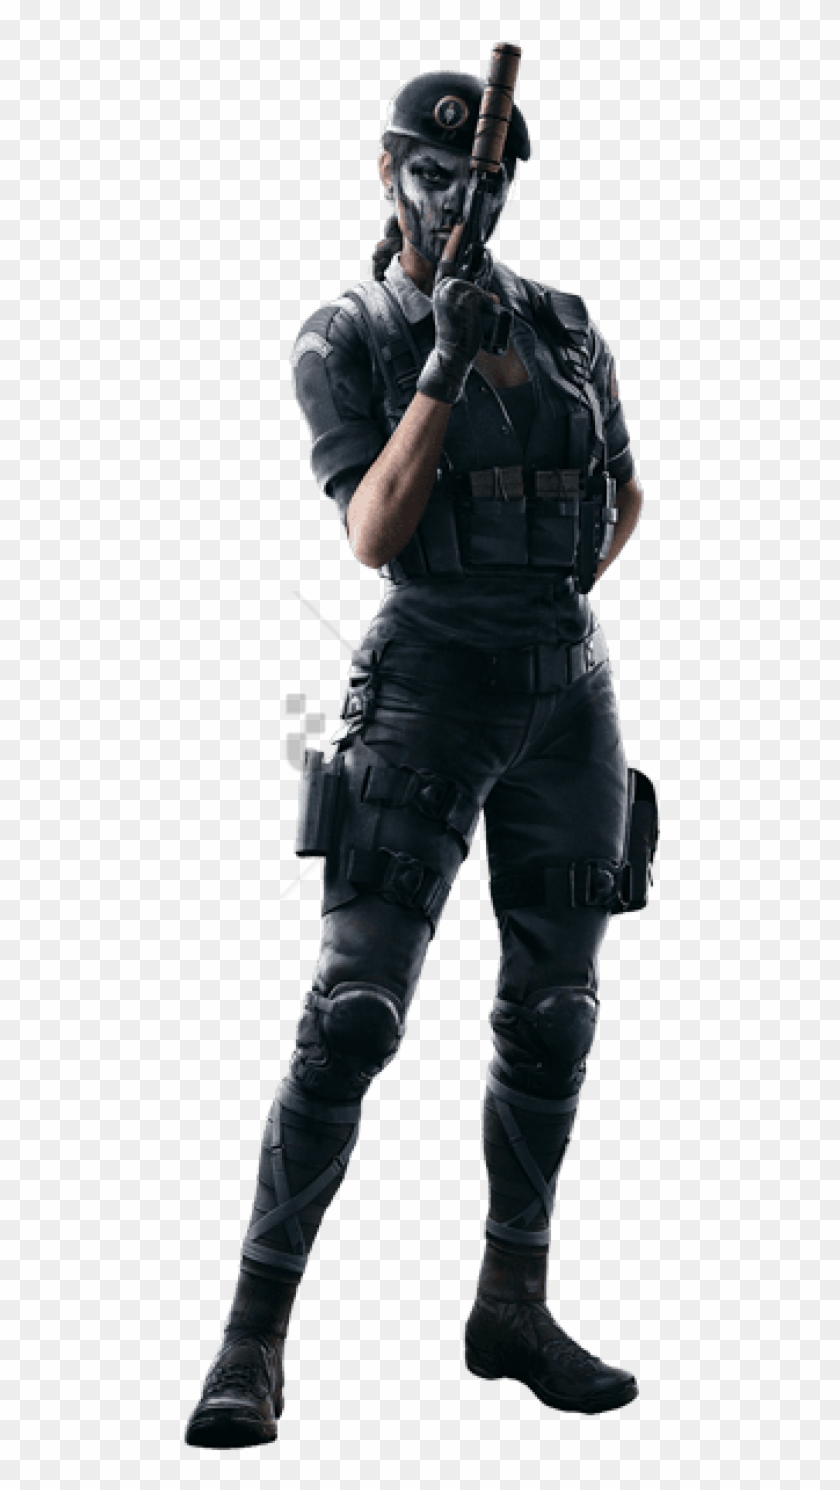 Free Png Download Caveira Rainbow Six Siege Png Images Transparent Rainbow Six Siege Caveira Clipart Pikpng